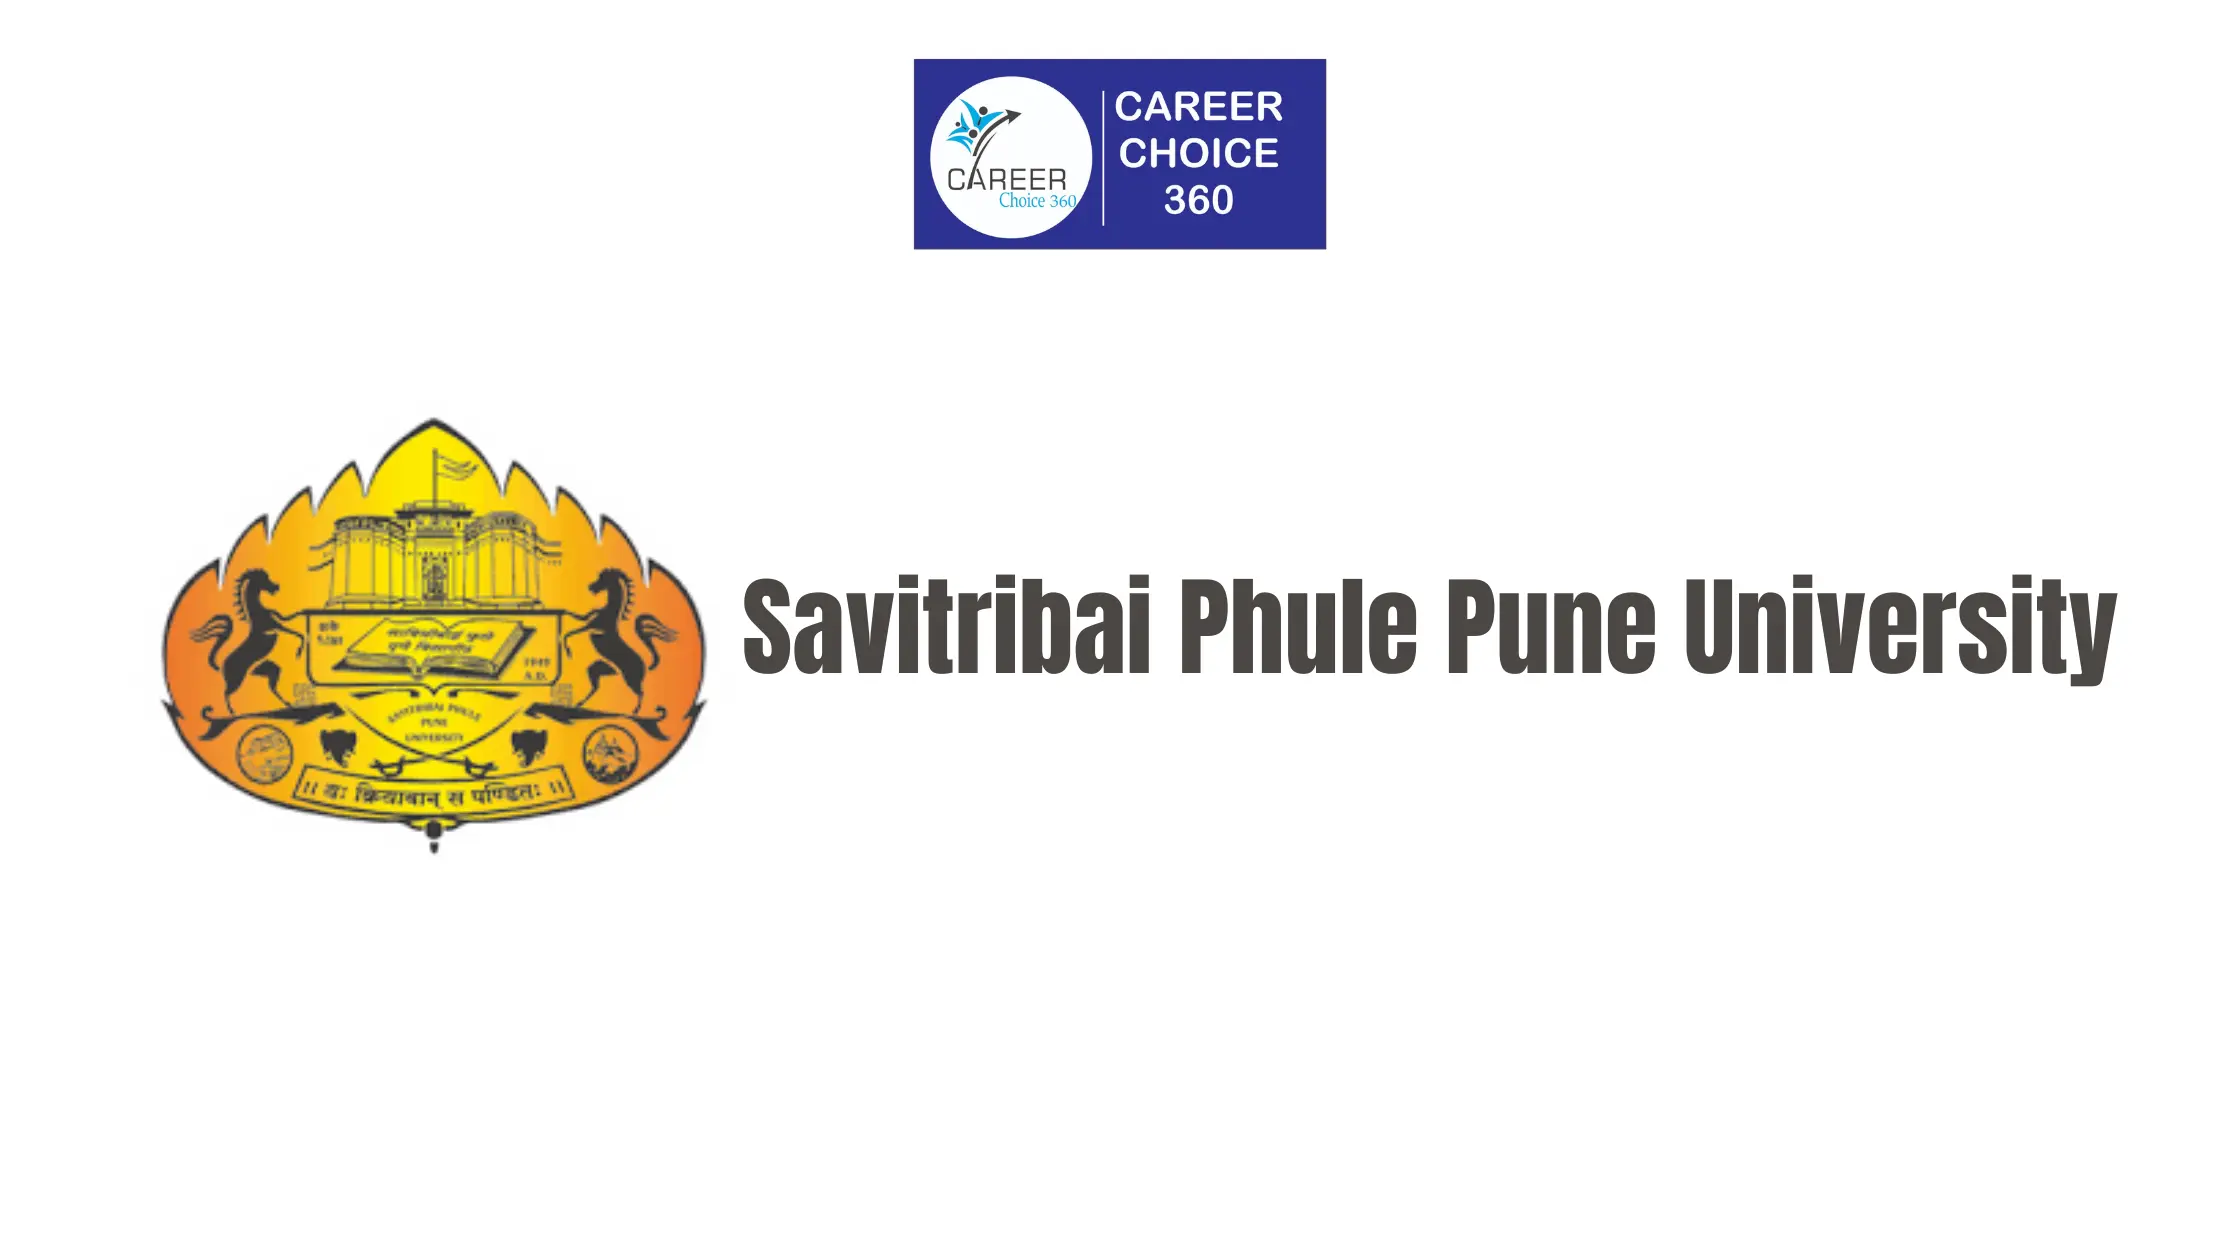 You are currently viewing Savitribai Phule Pune University (SPPU): Highlights, Courses and Fees, Admissions, Selection Criteria, Eligibility Criteria, Placement, Ranking